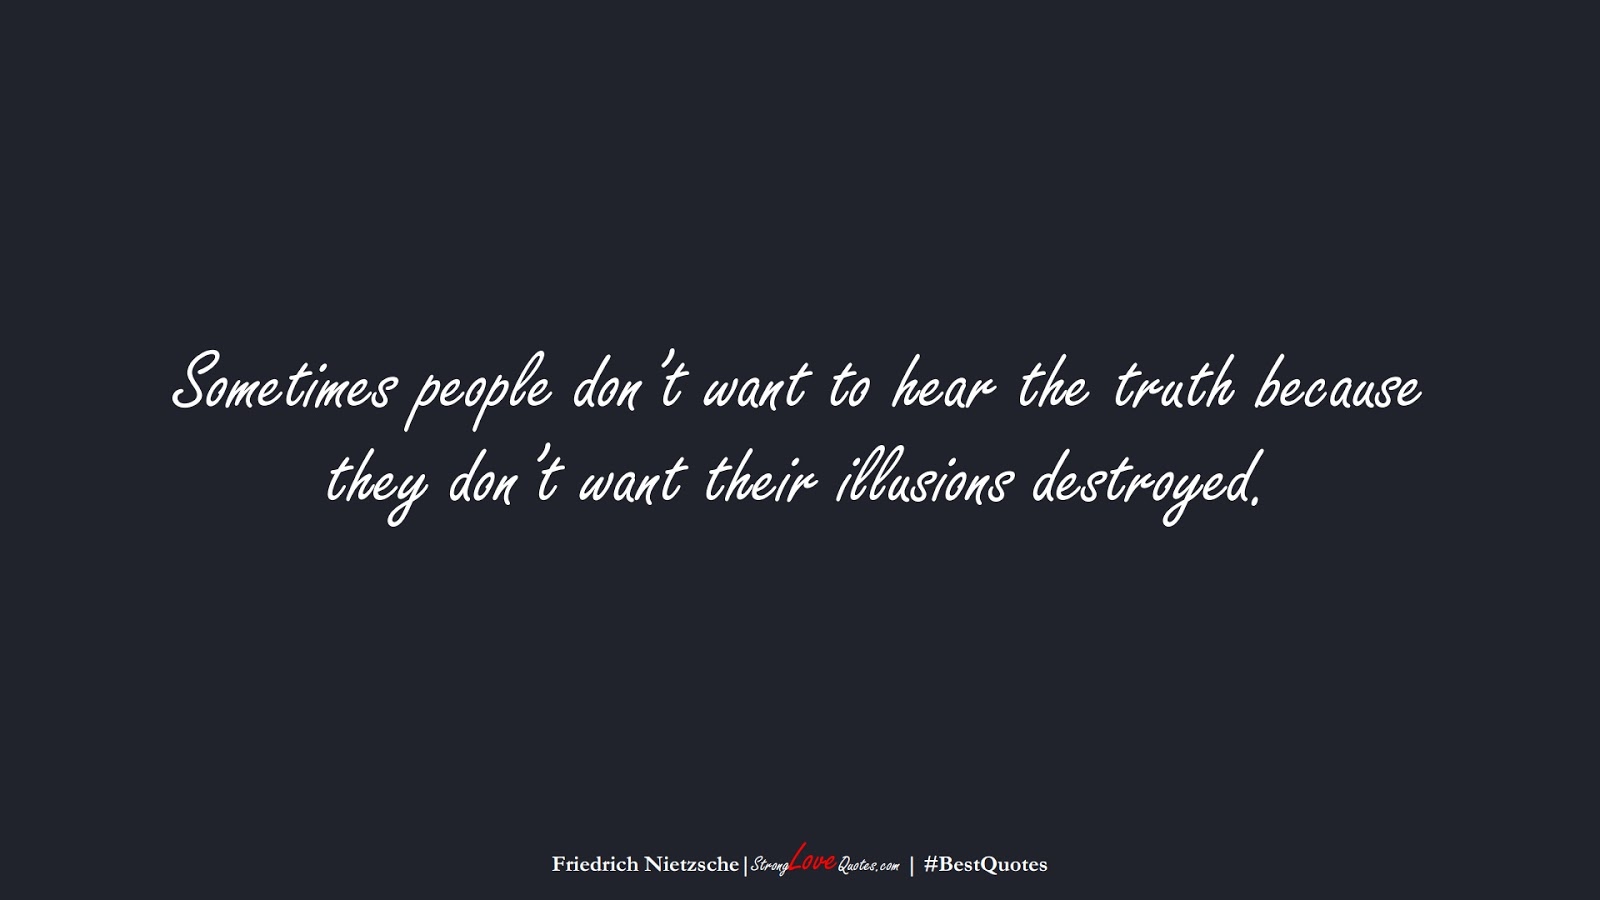 Sometimes people don’t want to hear the truth because they don’t want their illusions destroyed. (Friedrich Nietzsche);  #BestQuotes